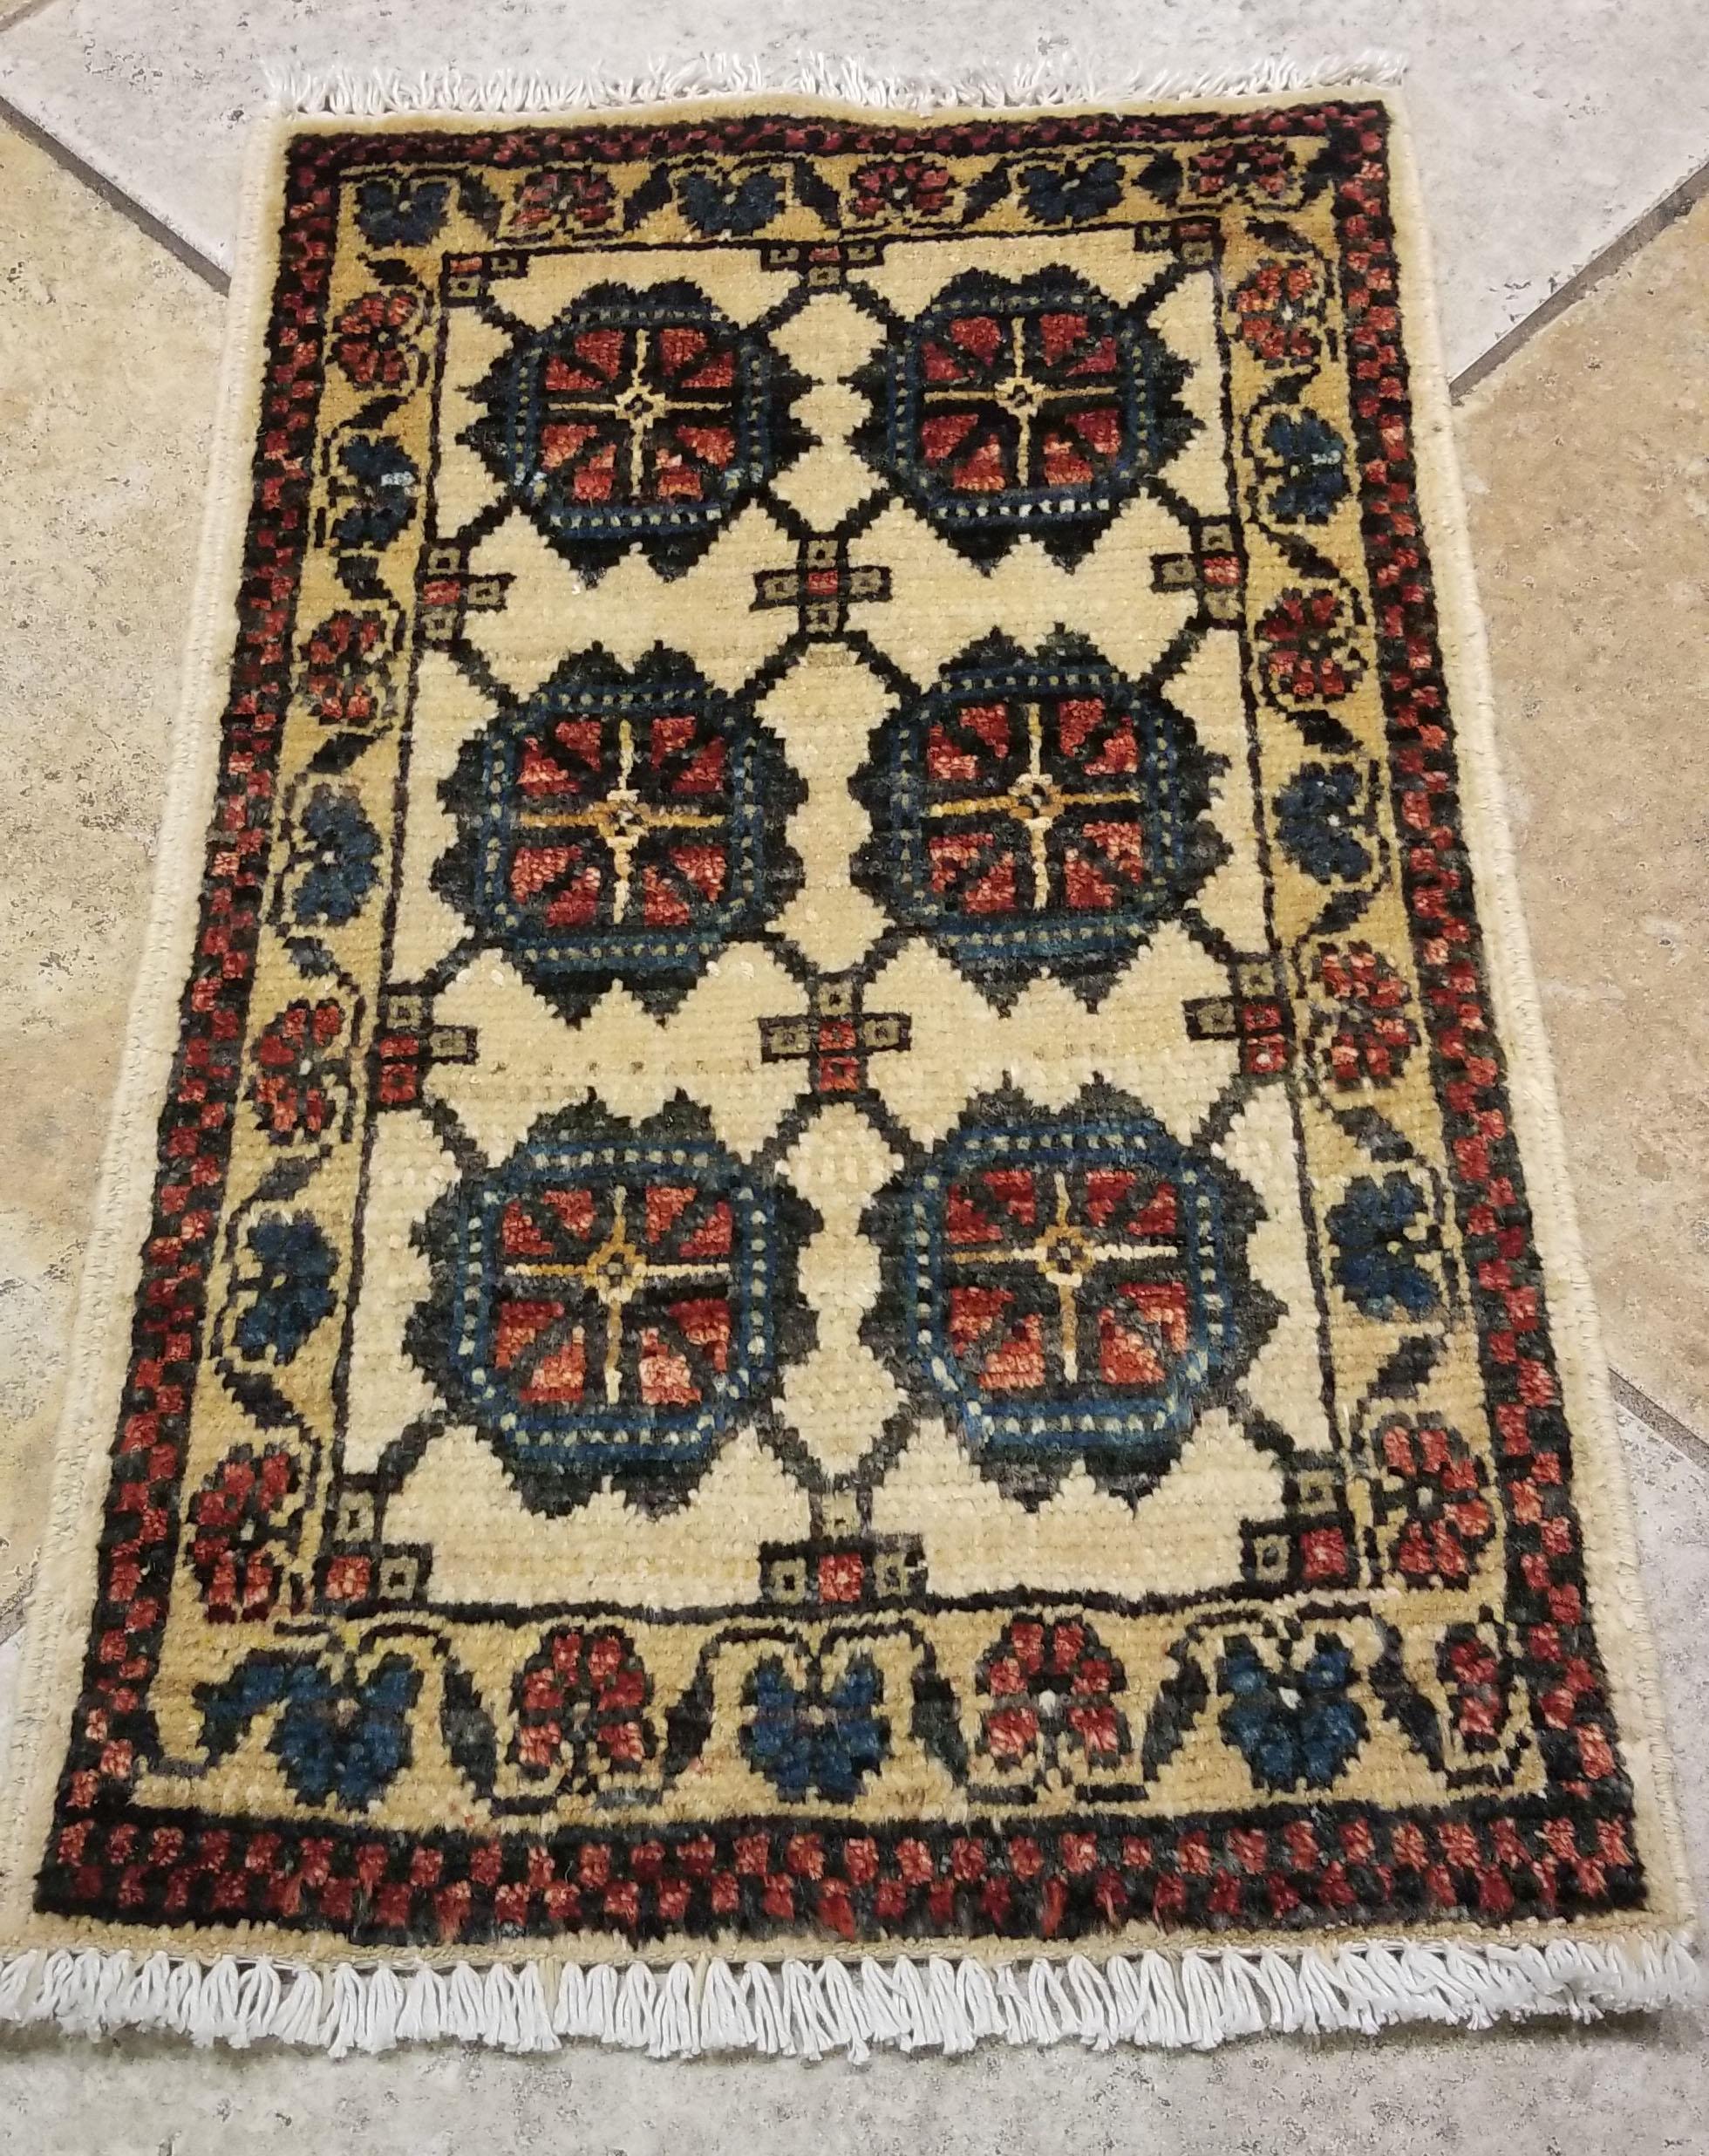 We carry some of the best Afghan bedside rugs, when you like to give your bedroom a colorful new look with one of our stunning carpets. This one measures approximately 27